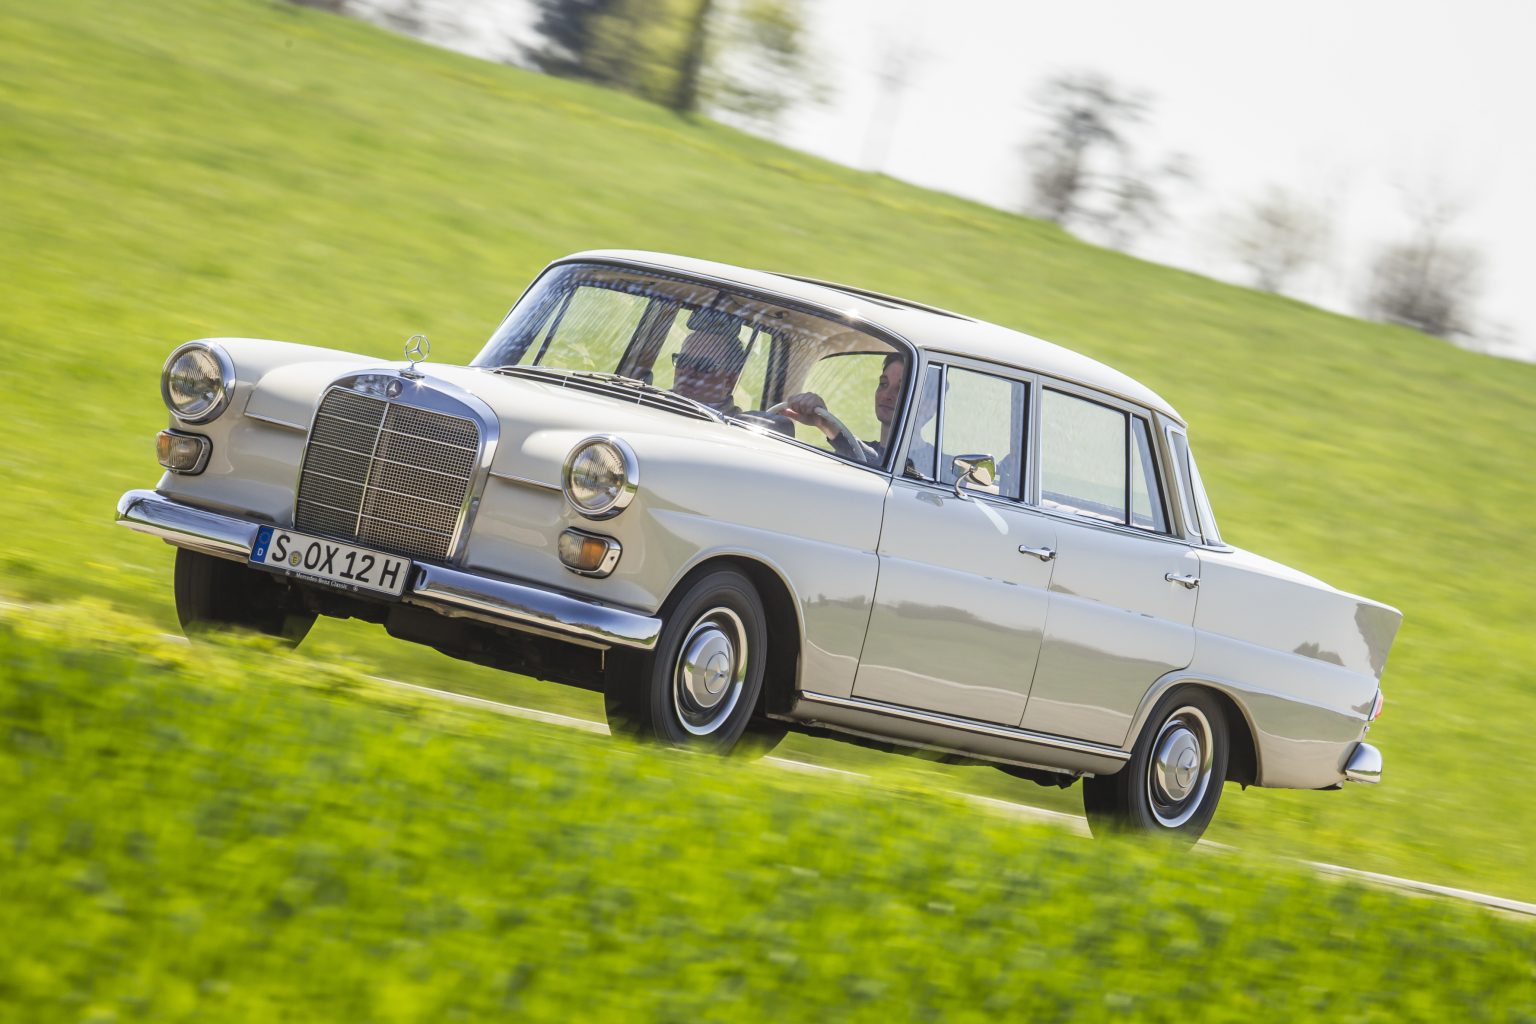 Mercedes-Benz 200 Fintail W 110. Moving vehicle. Photo from the Mercedes-Benz Classic Insight “History of the E-Class” from 19 to 22 April 2016.